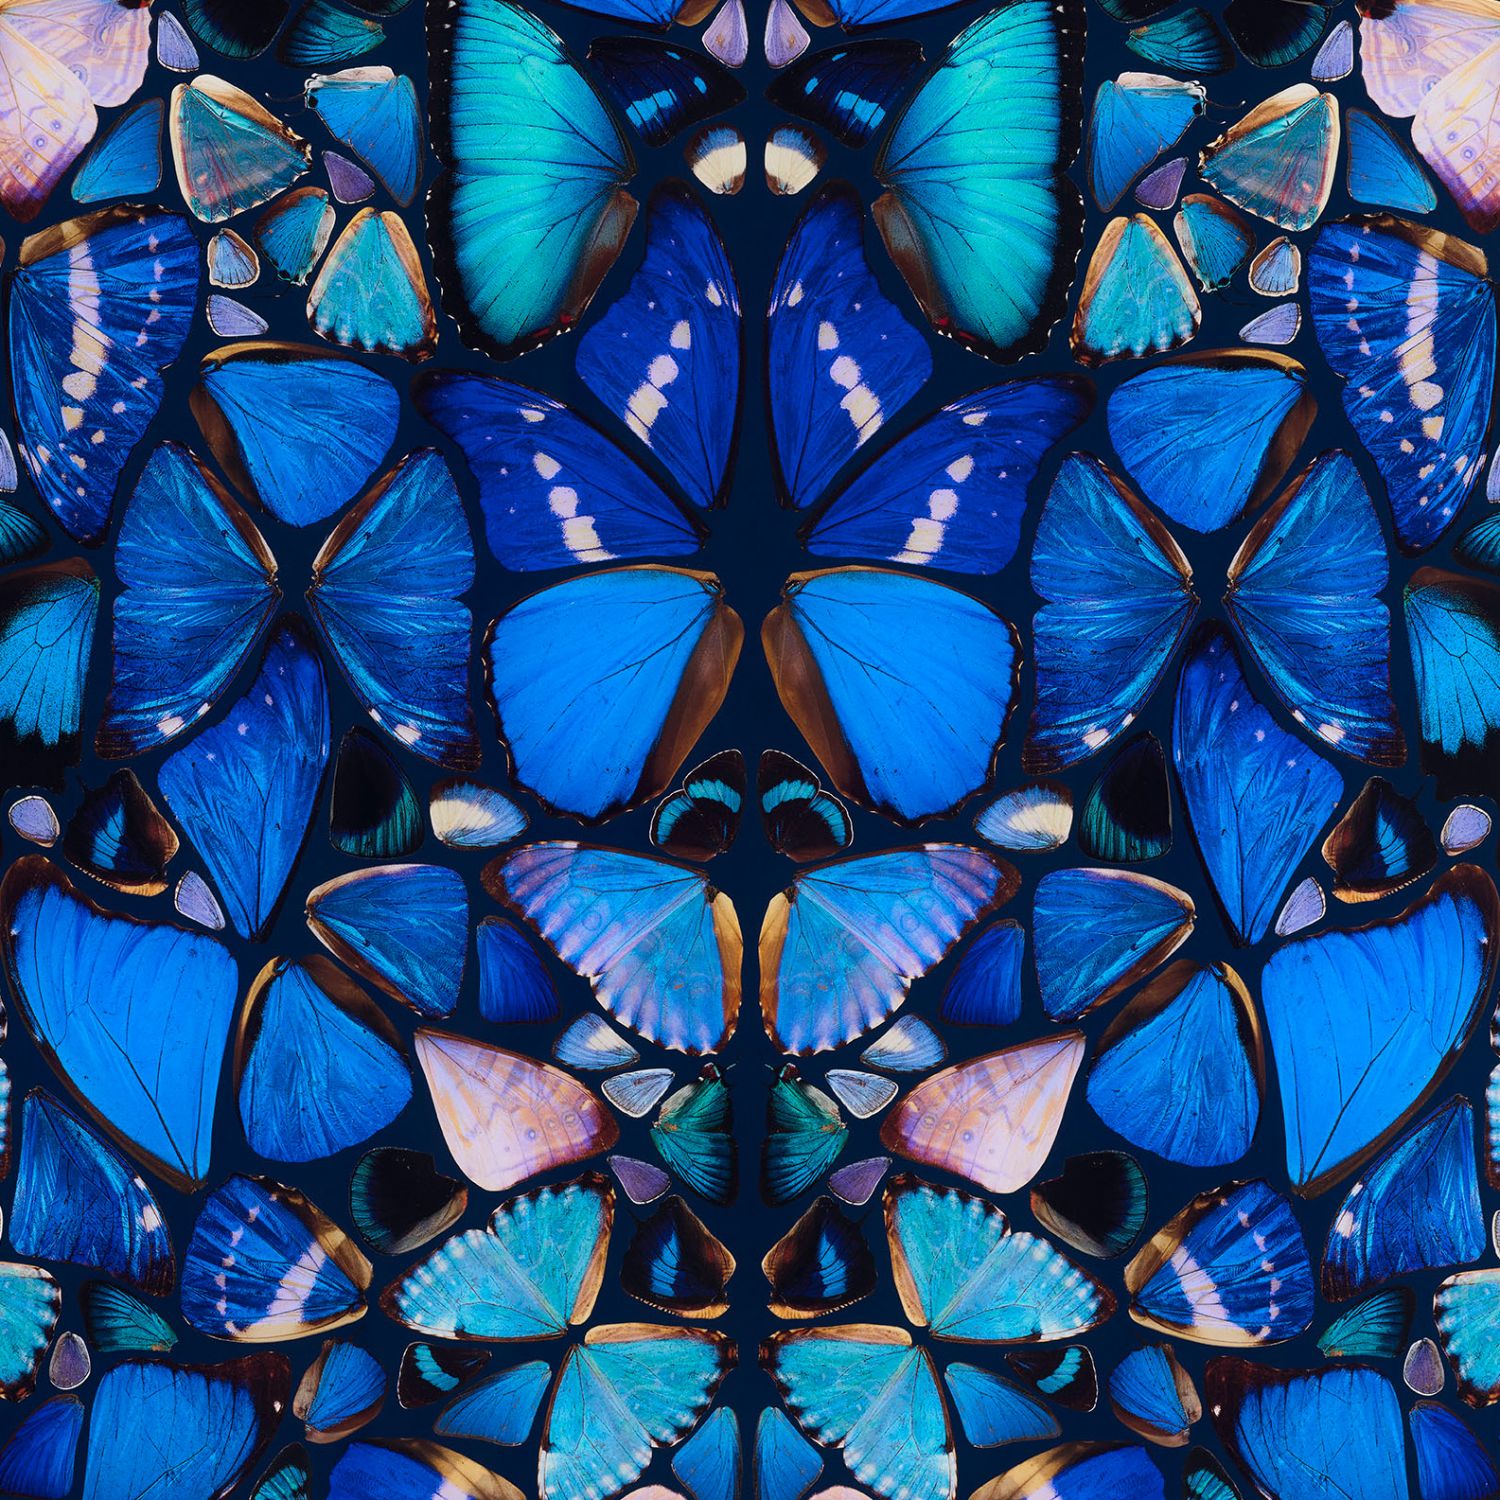 Young British Artists – the dead and yet alive Butterflies of Damien Hirst